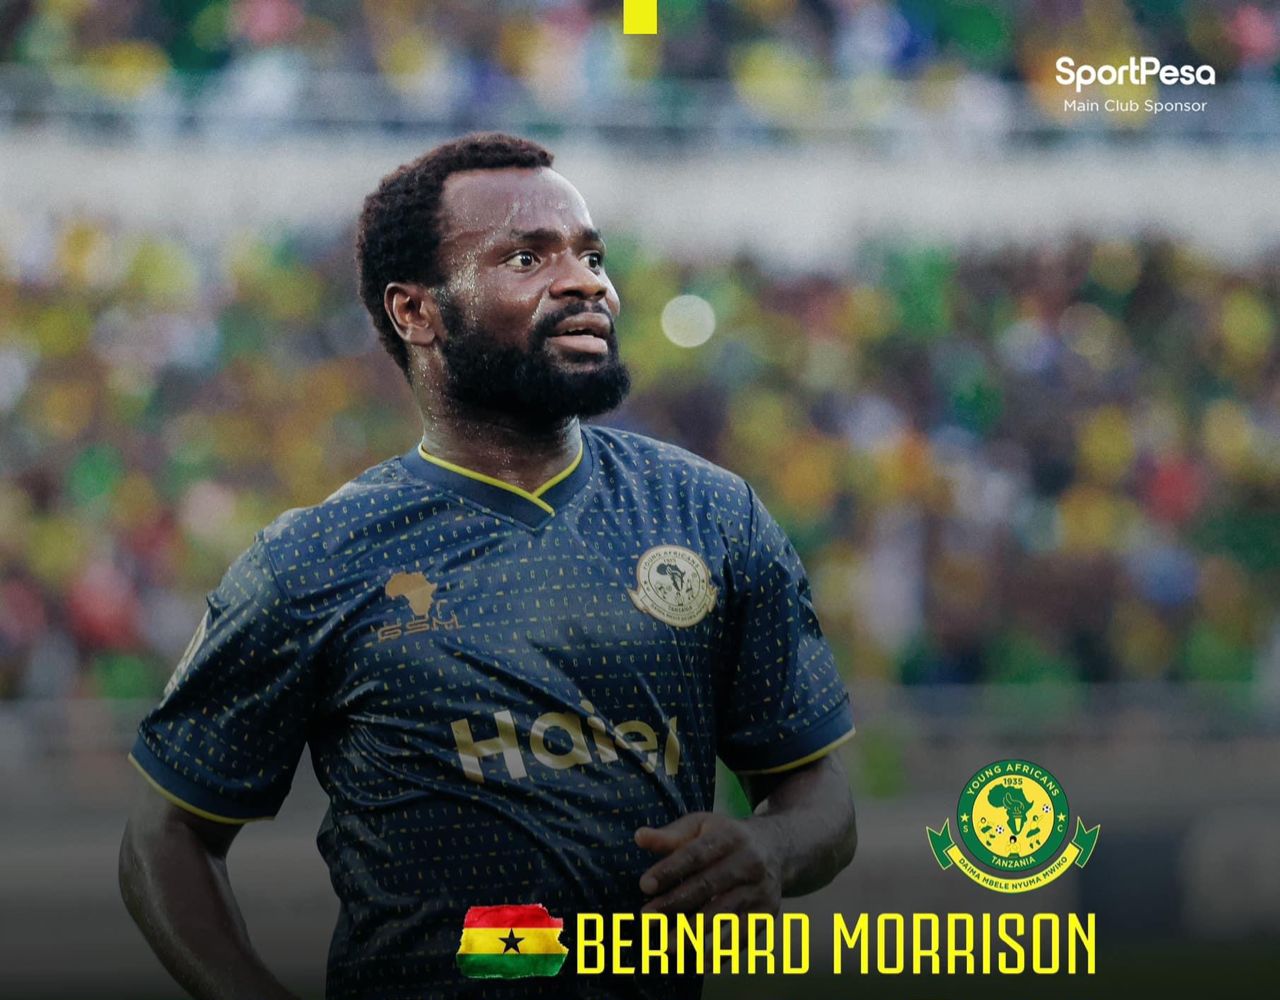 Western Region: Bernard Morrison to be named Continental Player of the Year